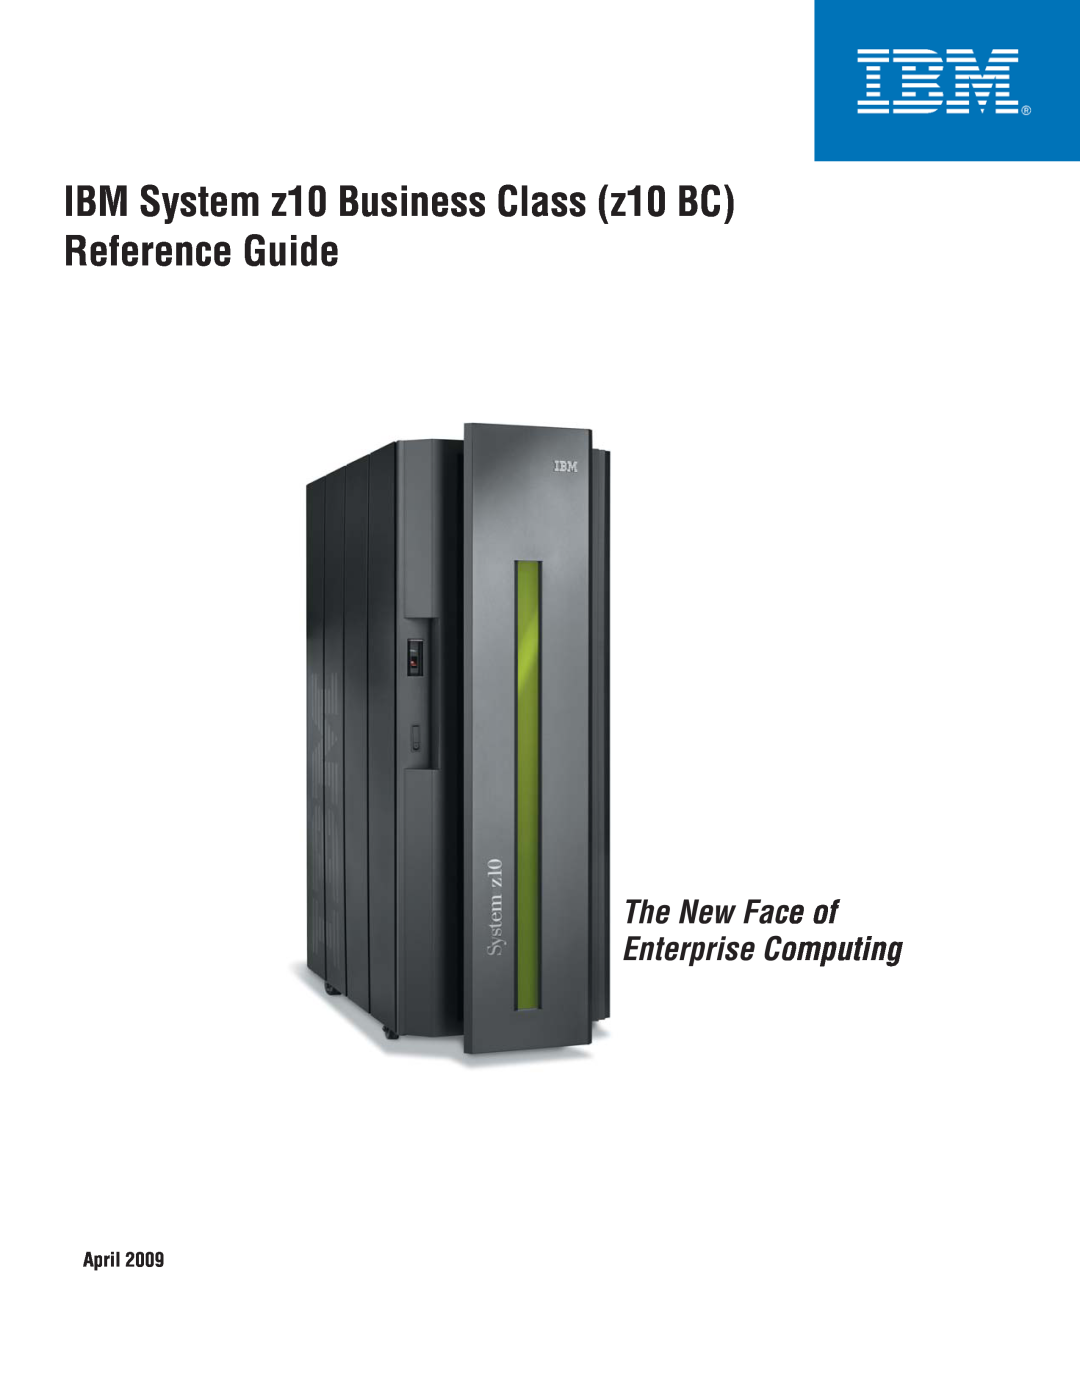 IBM Z10 BC manual April, IBM System z10 Business Class z10 BC Reference Guide, The New Face of Enterprise Computing 